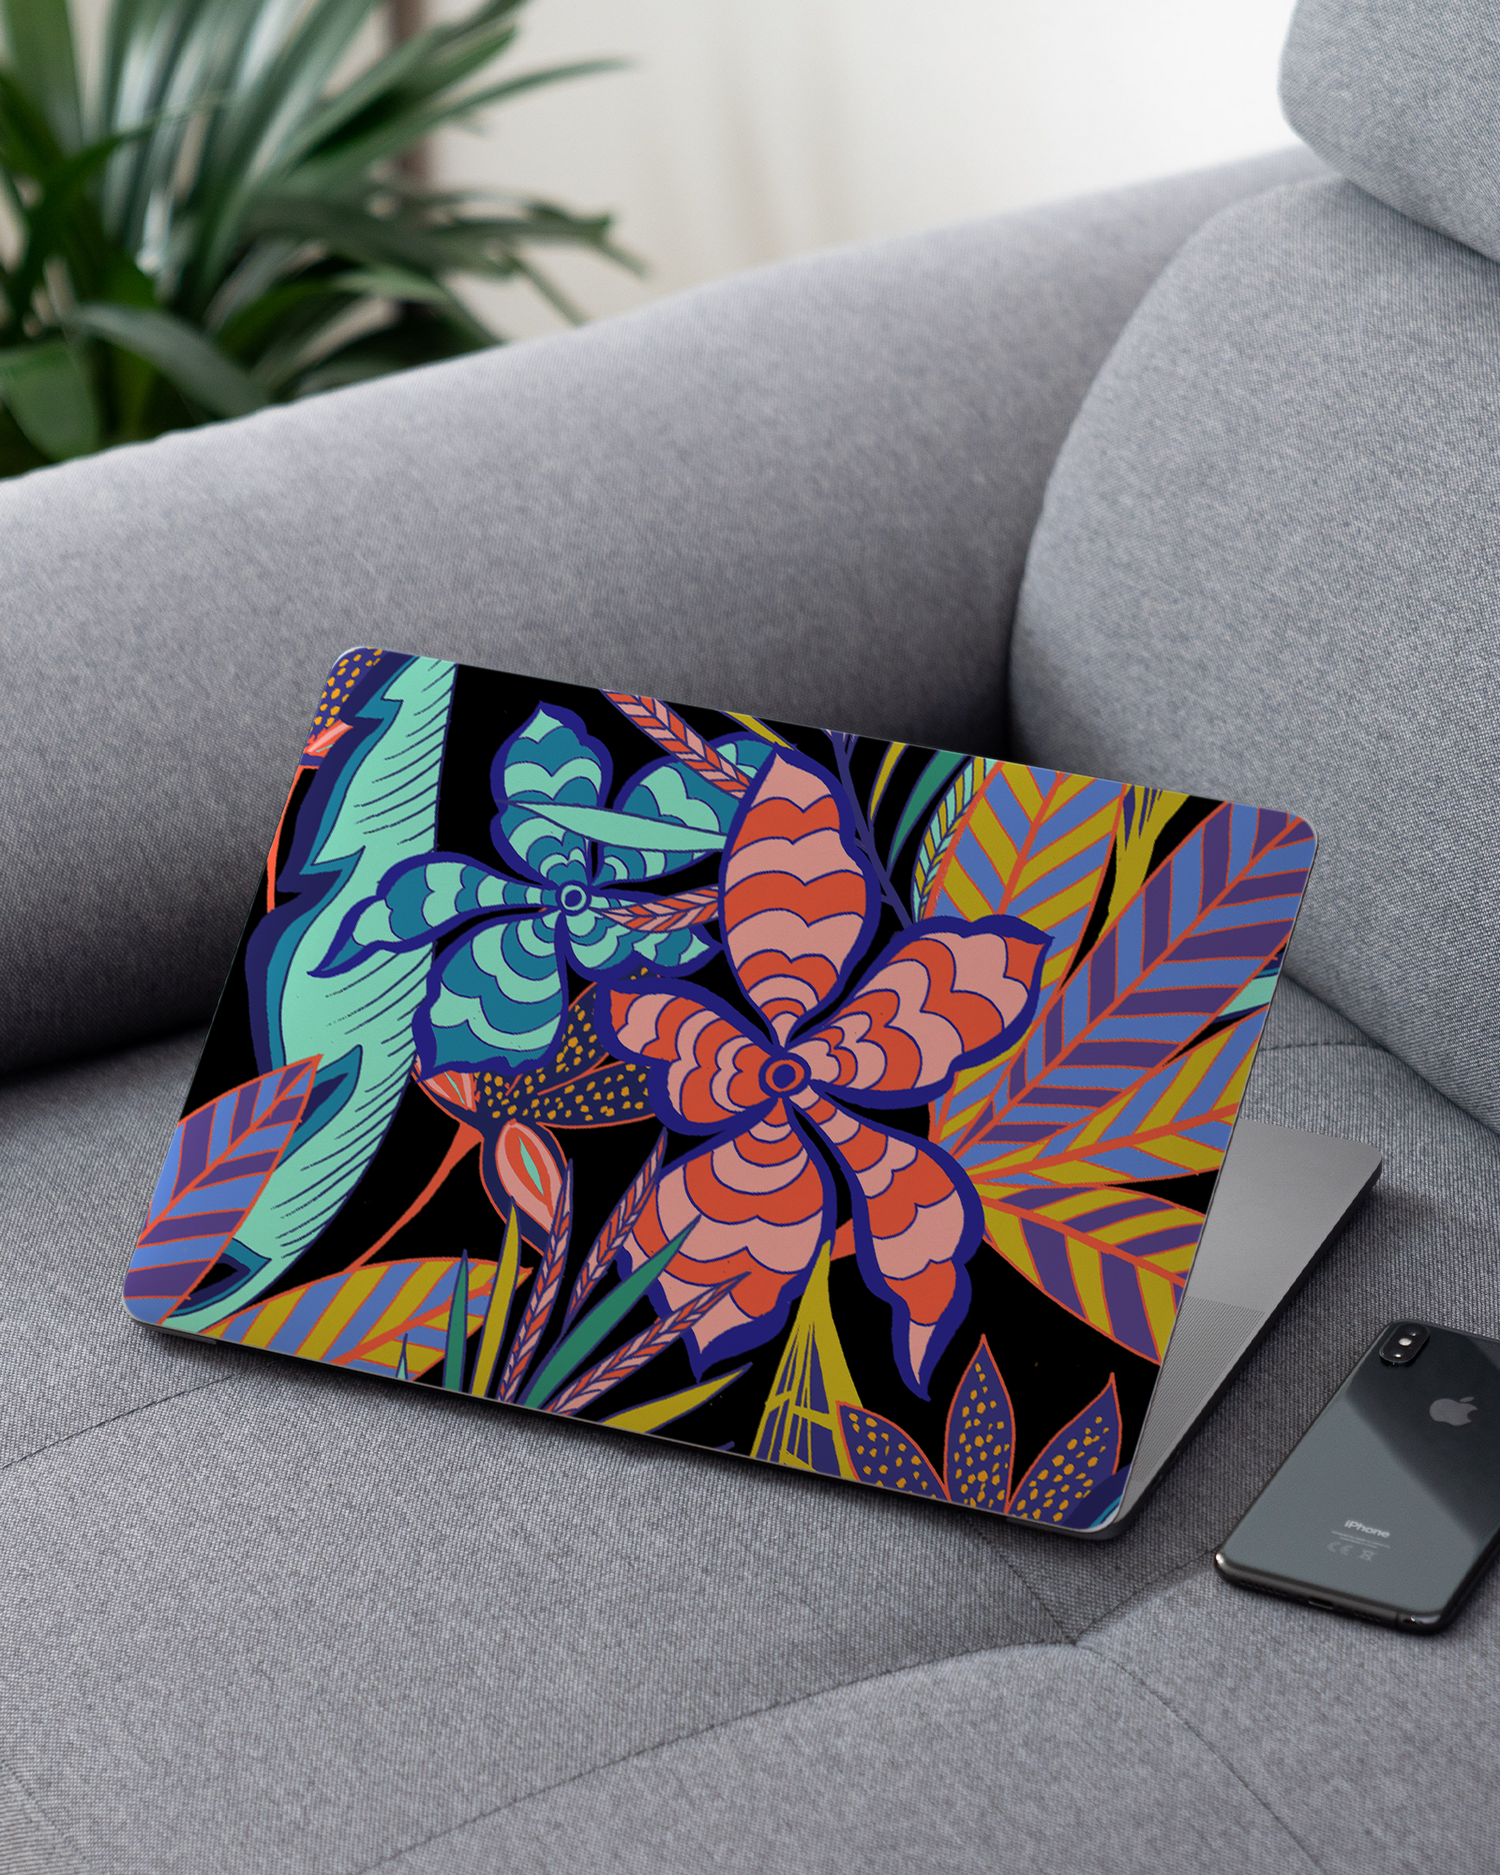 Tropical Psychedelic Pattern Laptop Skin for 13 inch Apple MacBooks on a couch